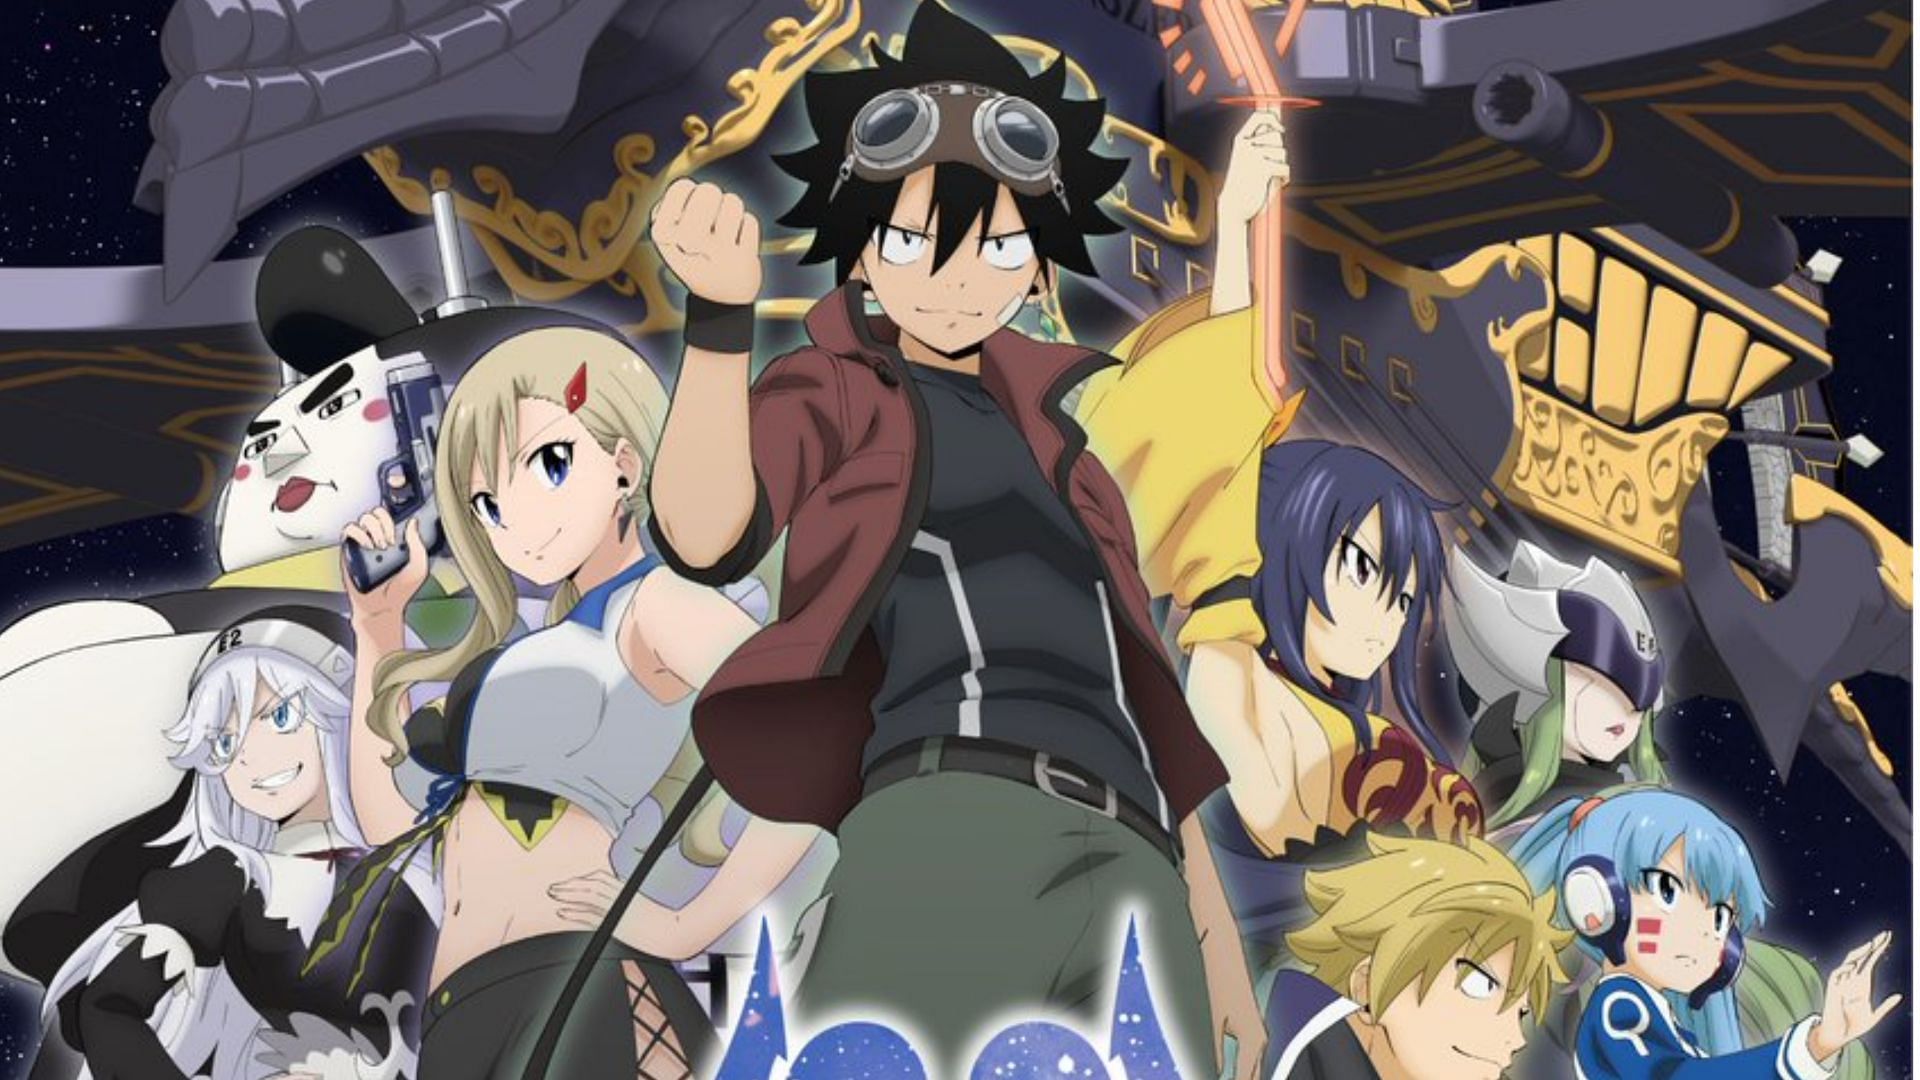 First Trailer For 'Edens Zero' Season Two Confirms Release Date